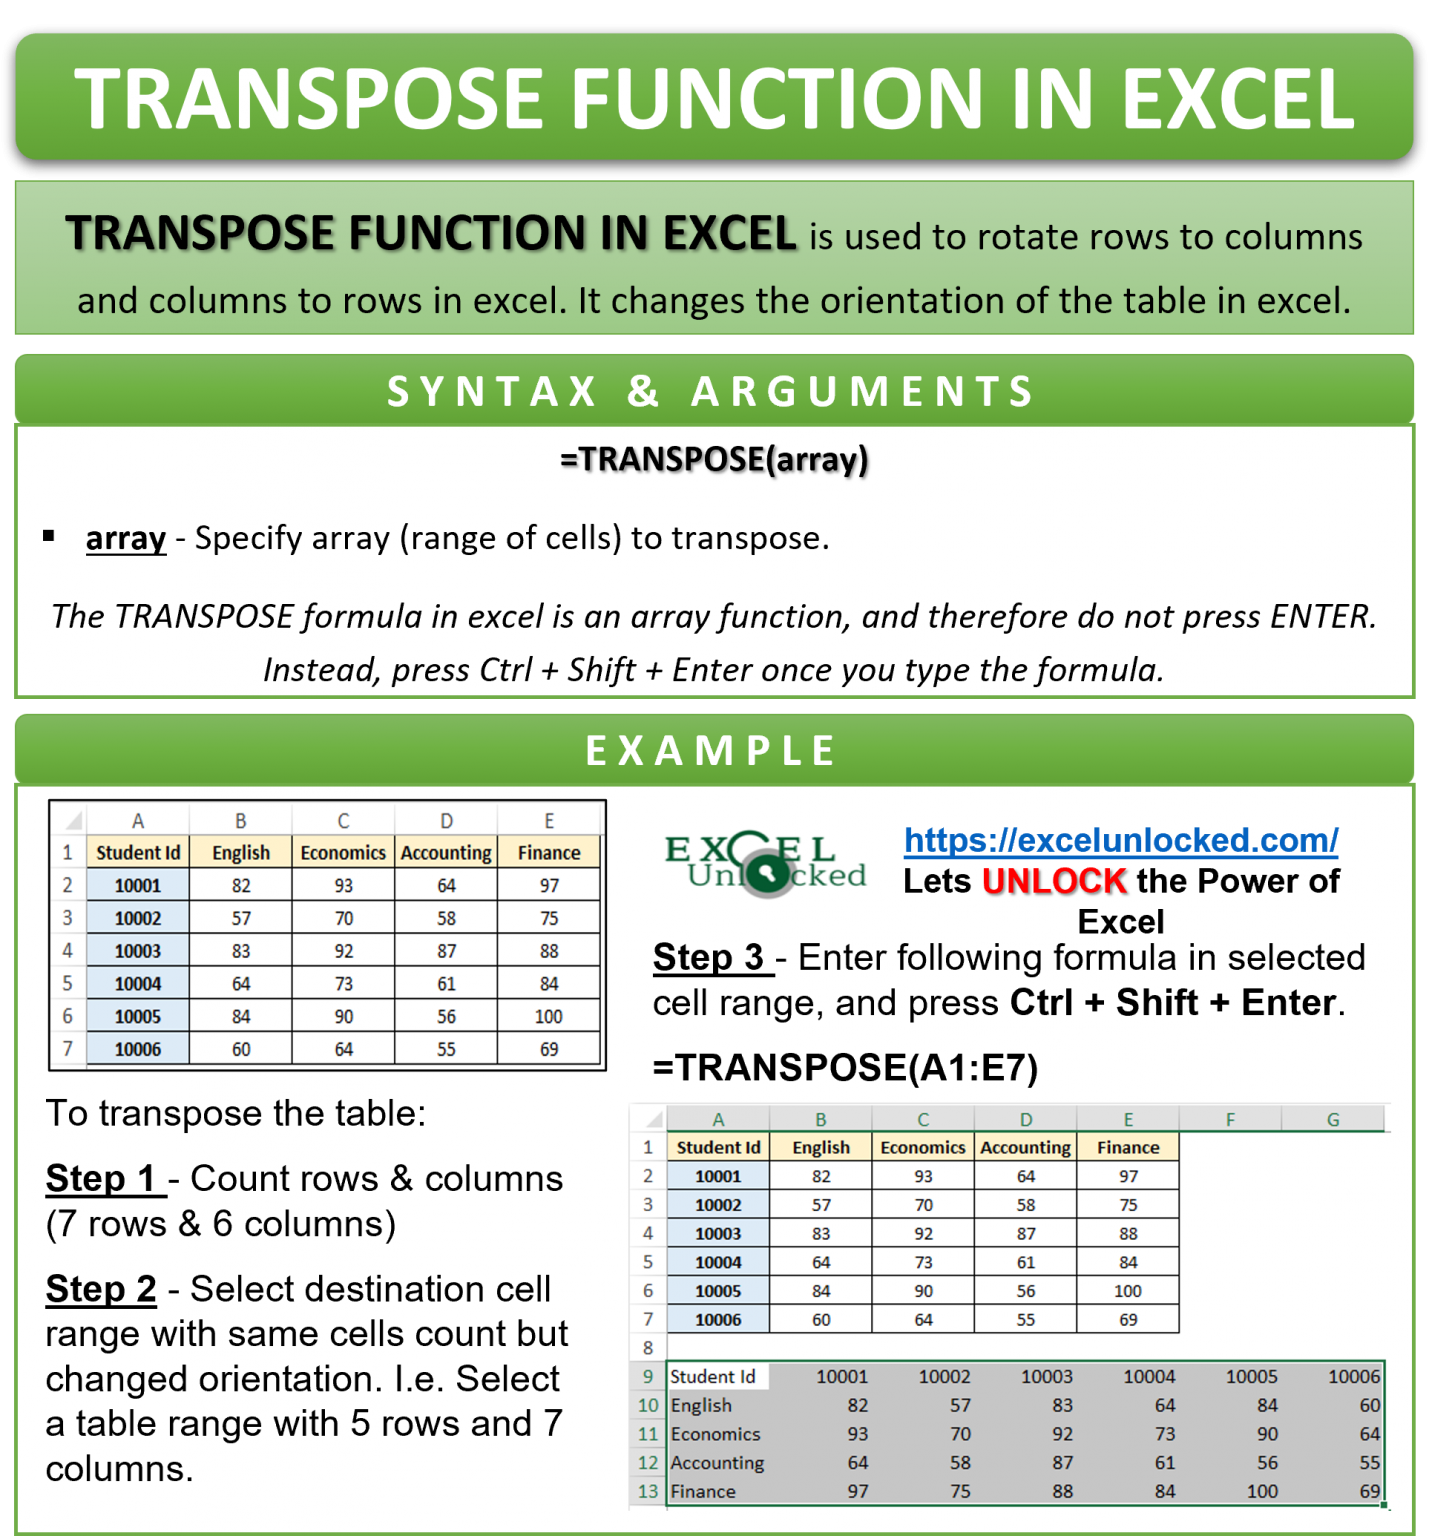 excel-transpose-function-rotate-columns-to-rows-excel-unlocked